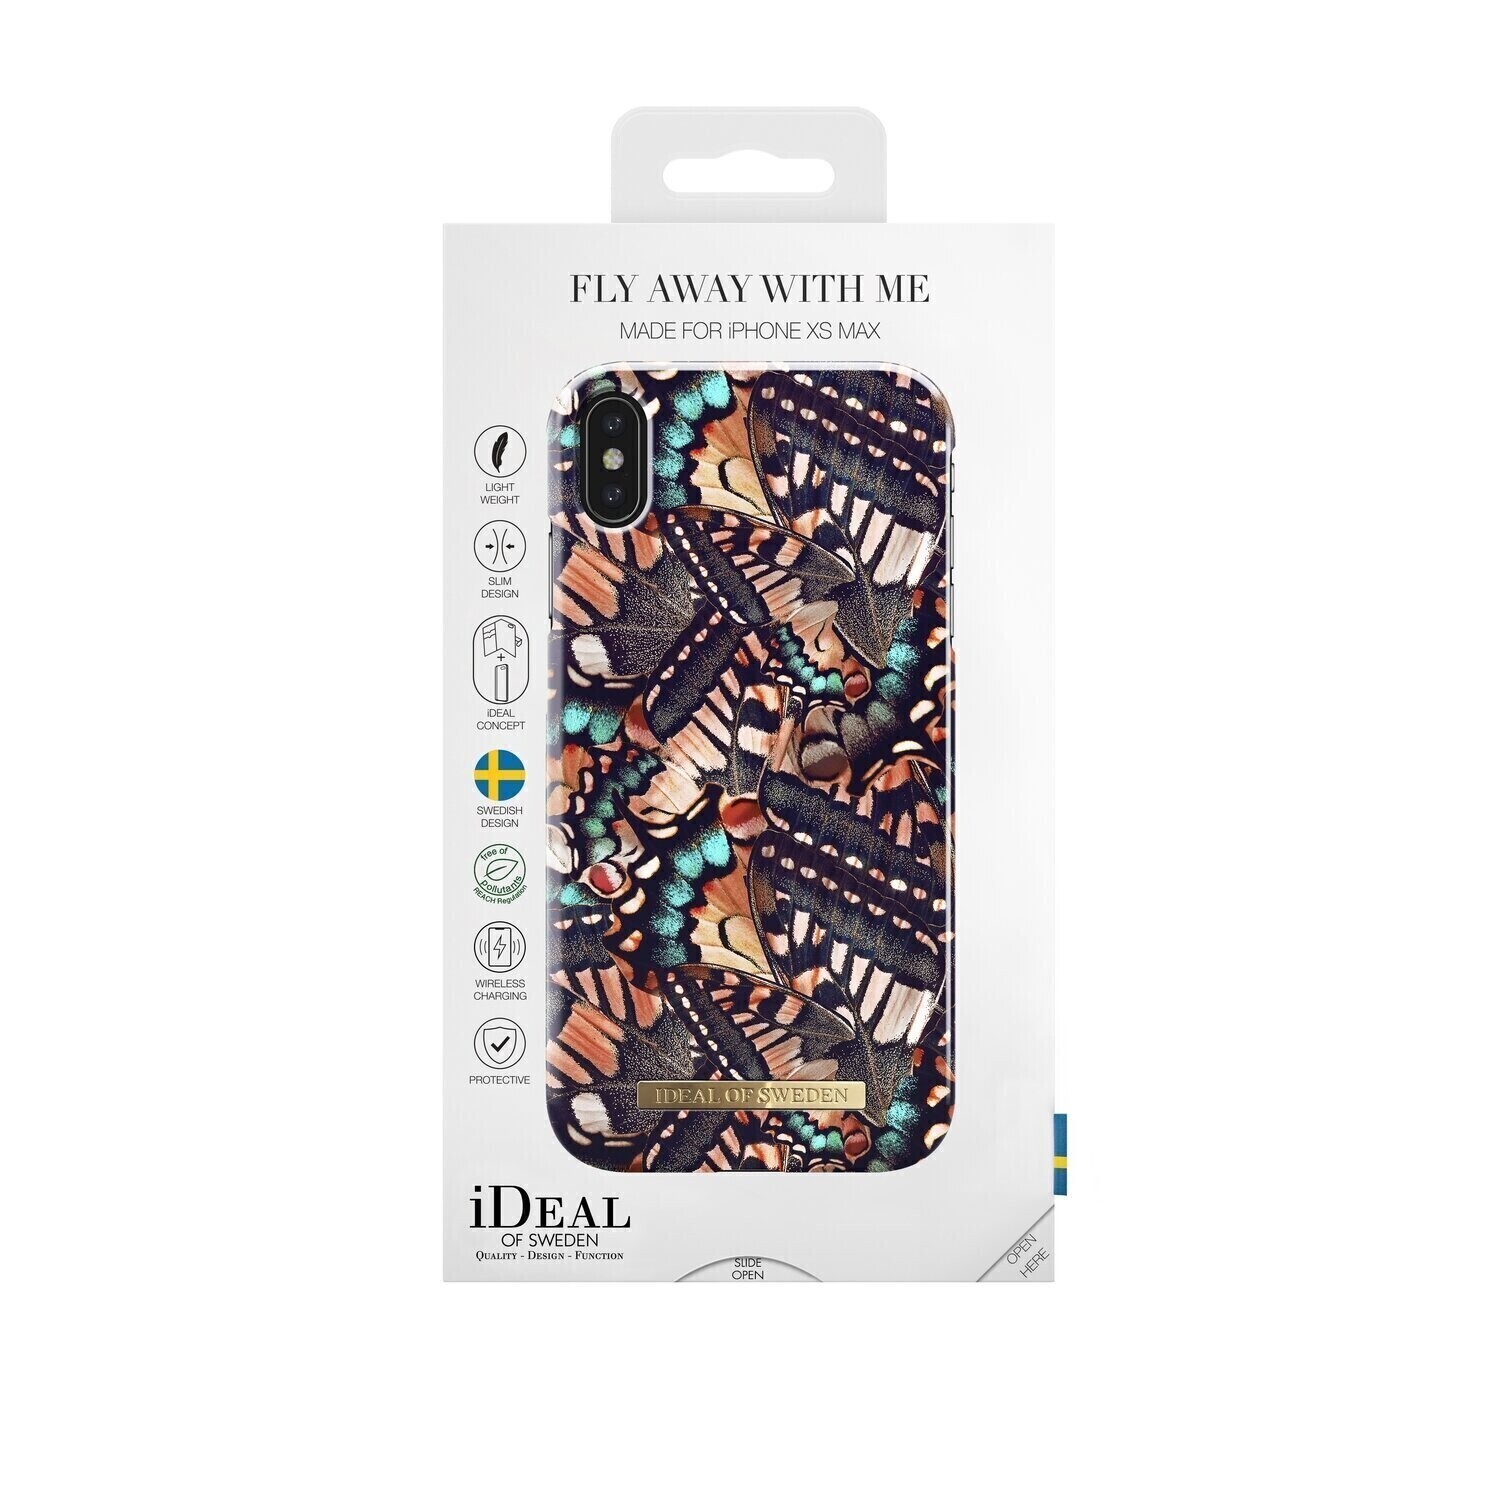 iDeal Of Sweden iPhone Xs Max Fashion Case A/W 2018, Fly Away With Me